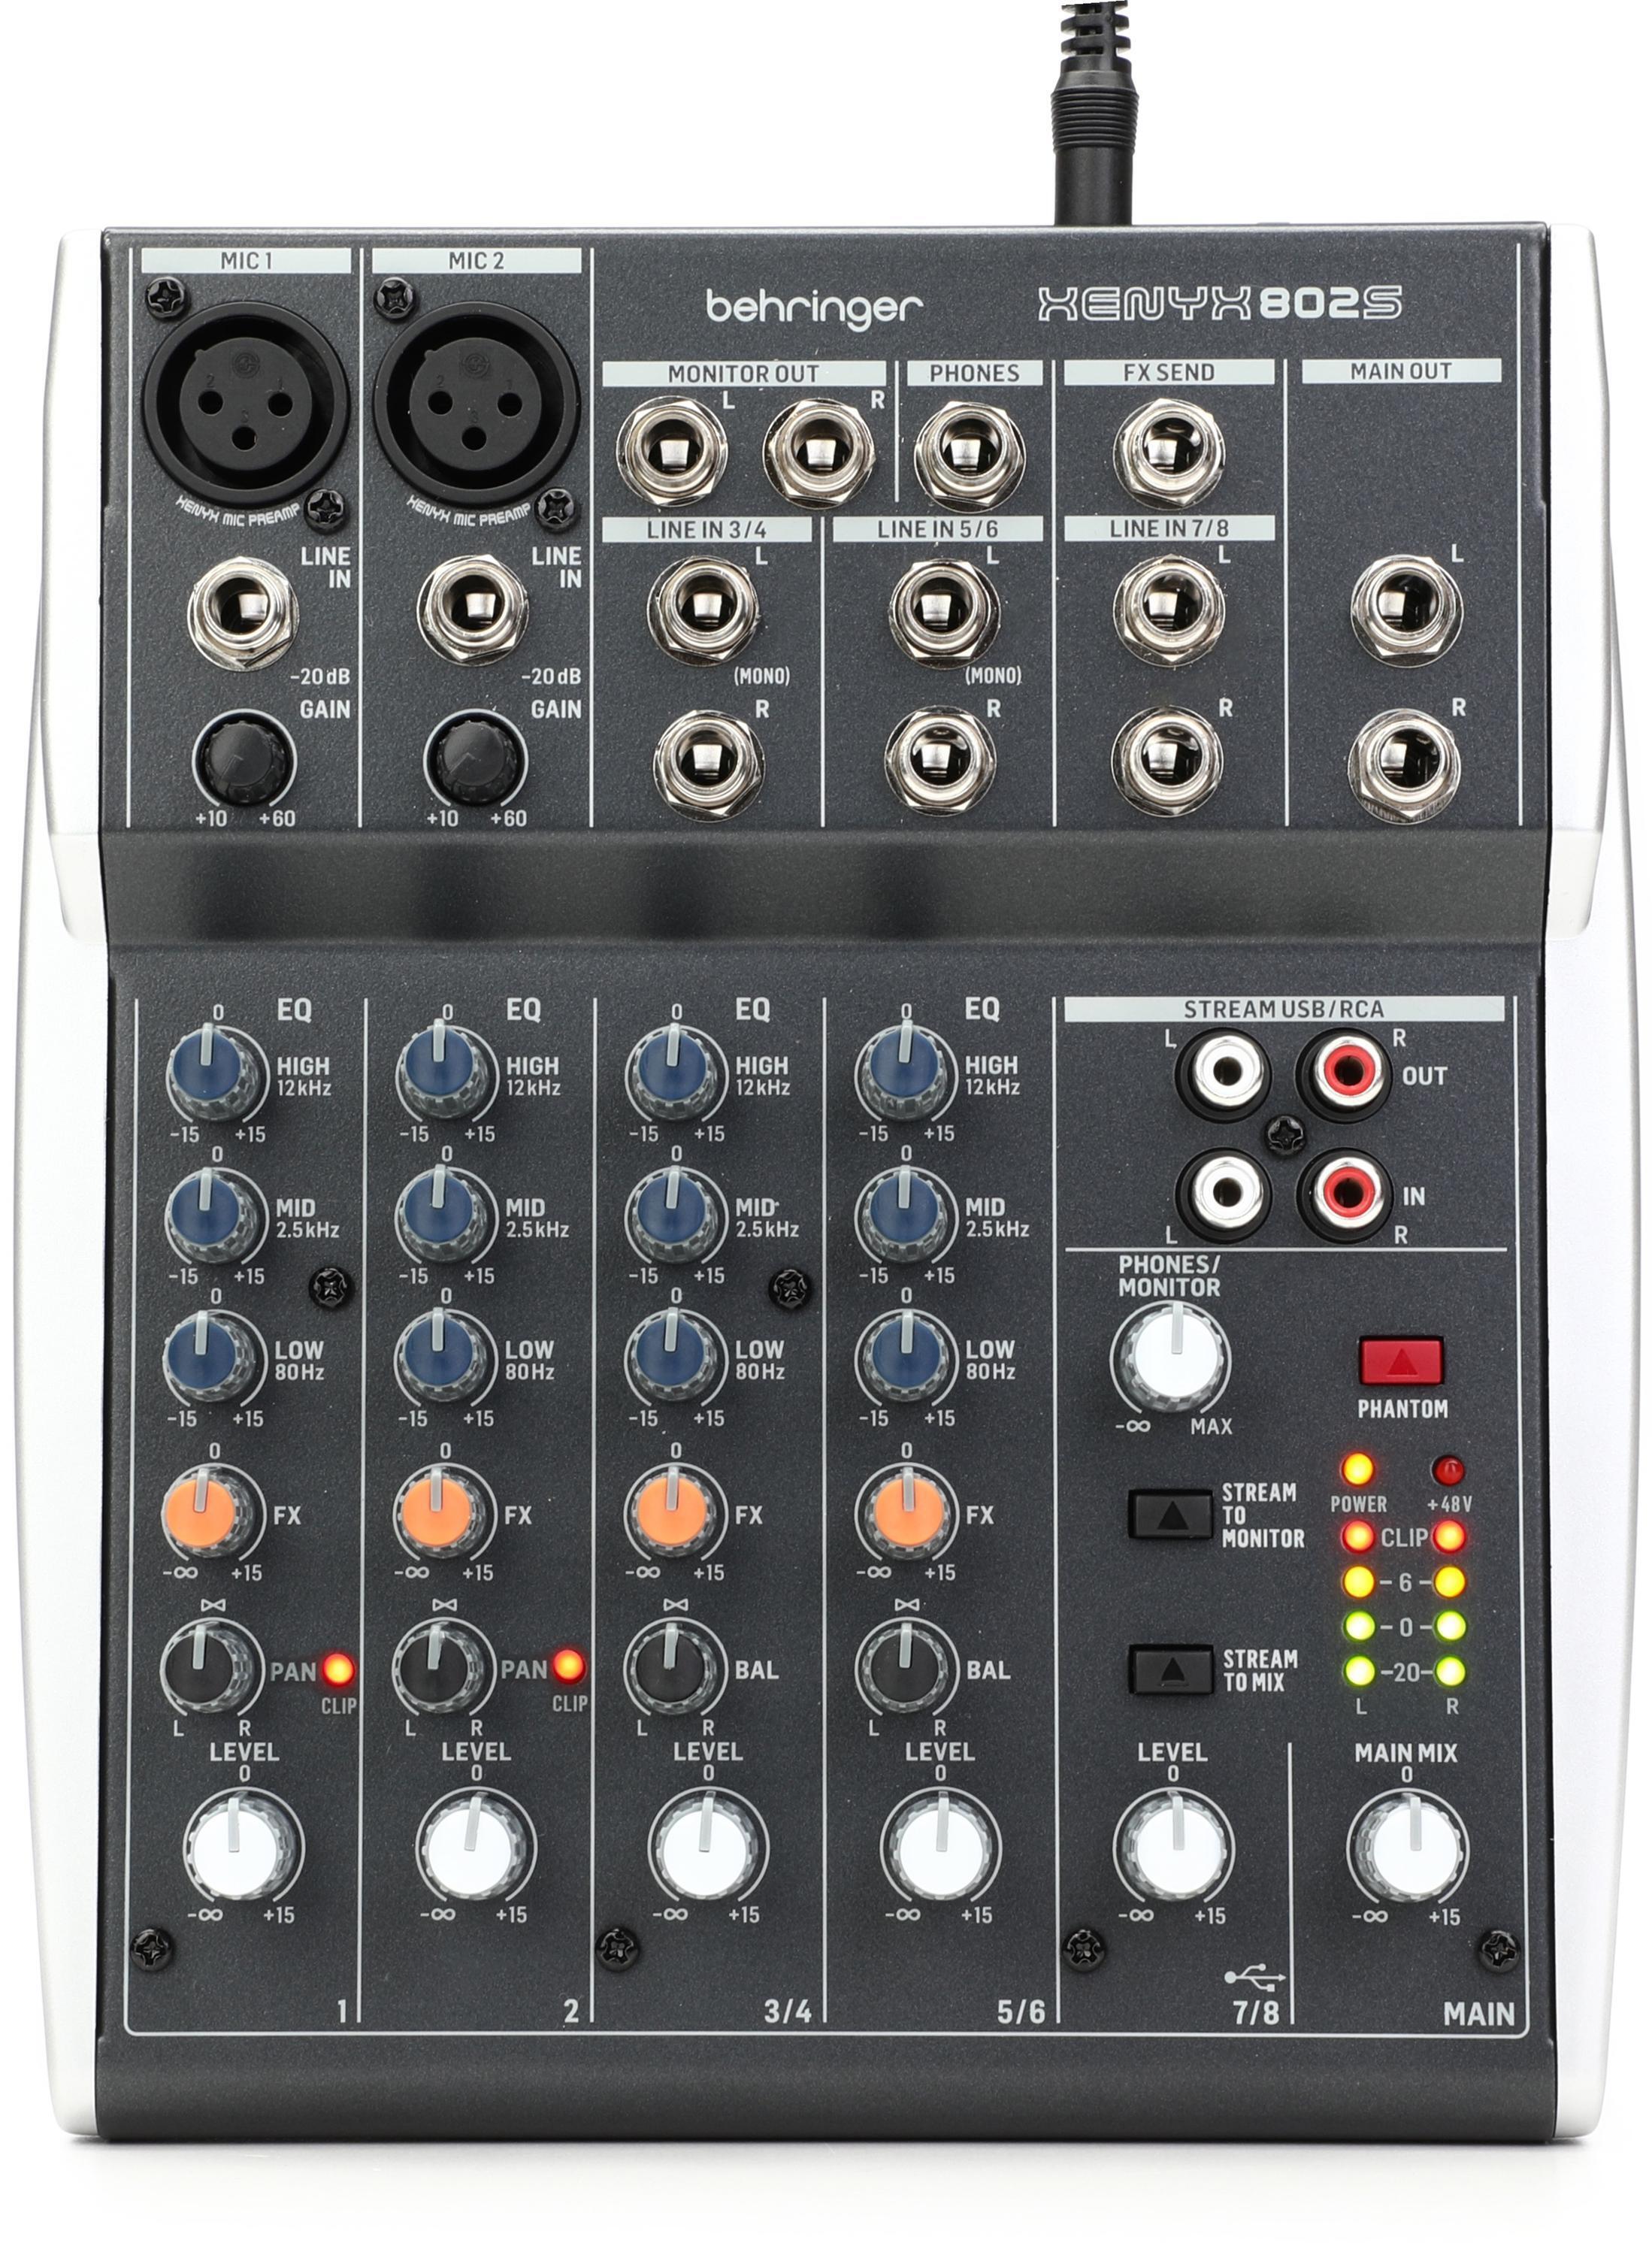 Behringer Xenyx Q1002USB Mixer with USB | Sweetwater